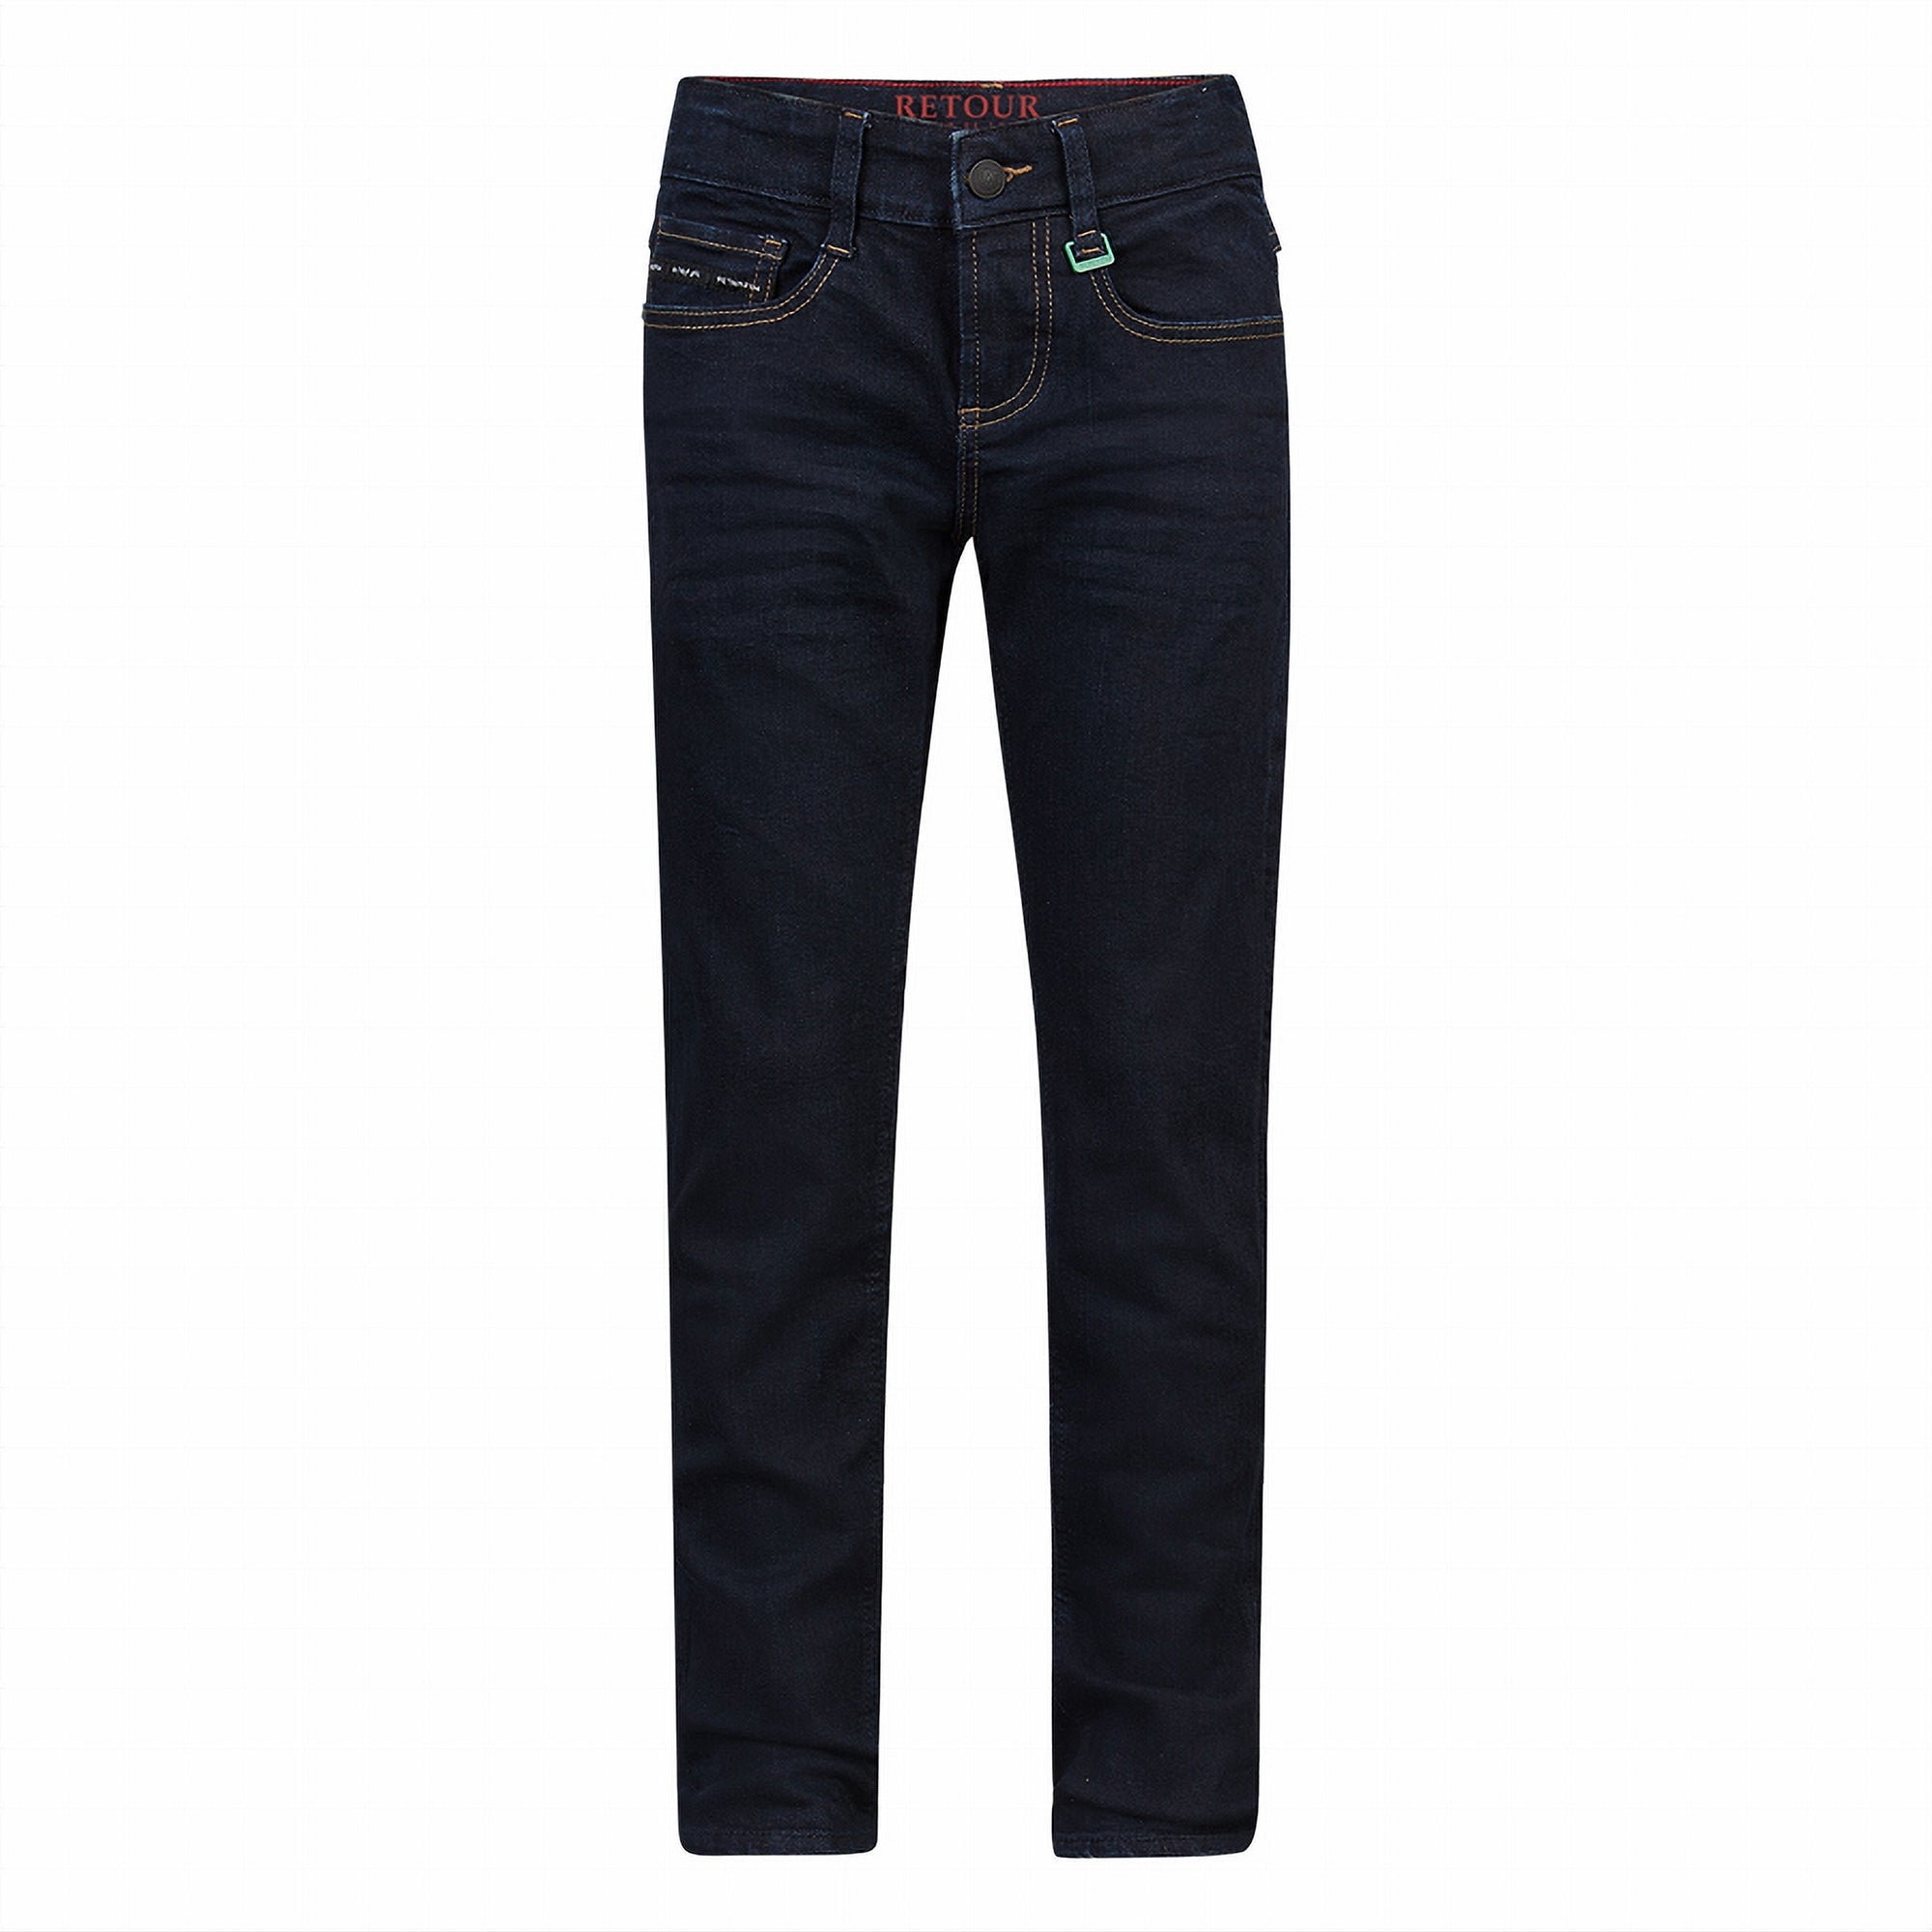 RETOUR Jeans Wulf rinsed blue